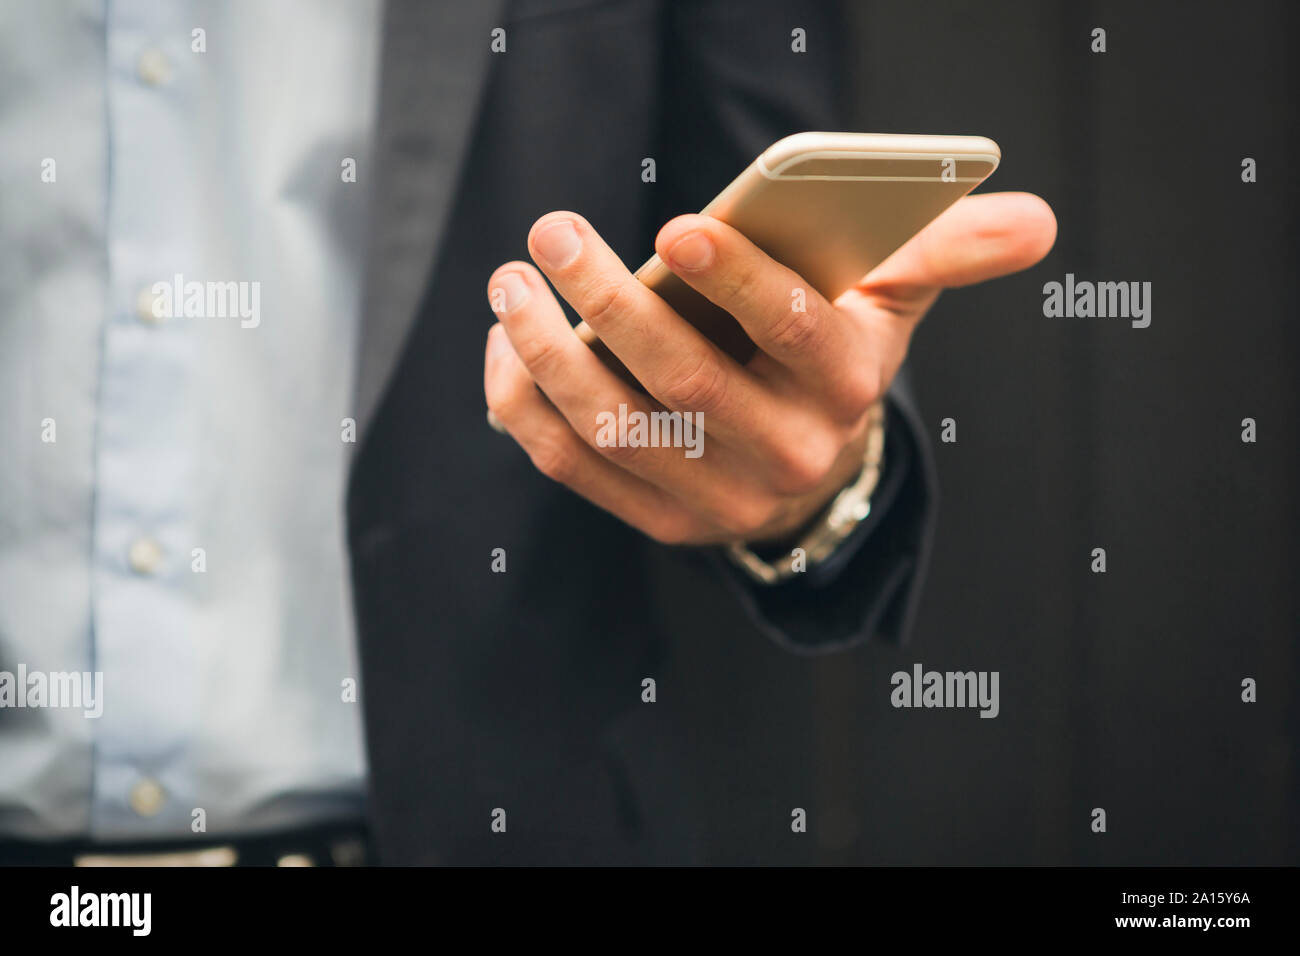 Hand of businessman holding mobile phone, close-up Stock Photo